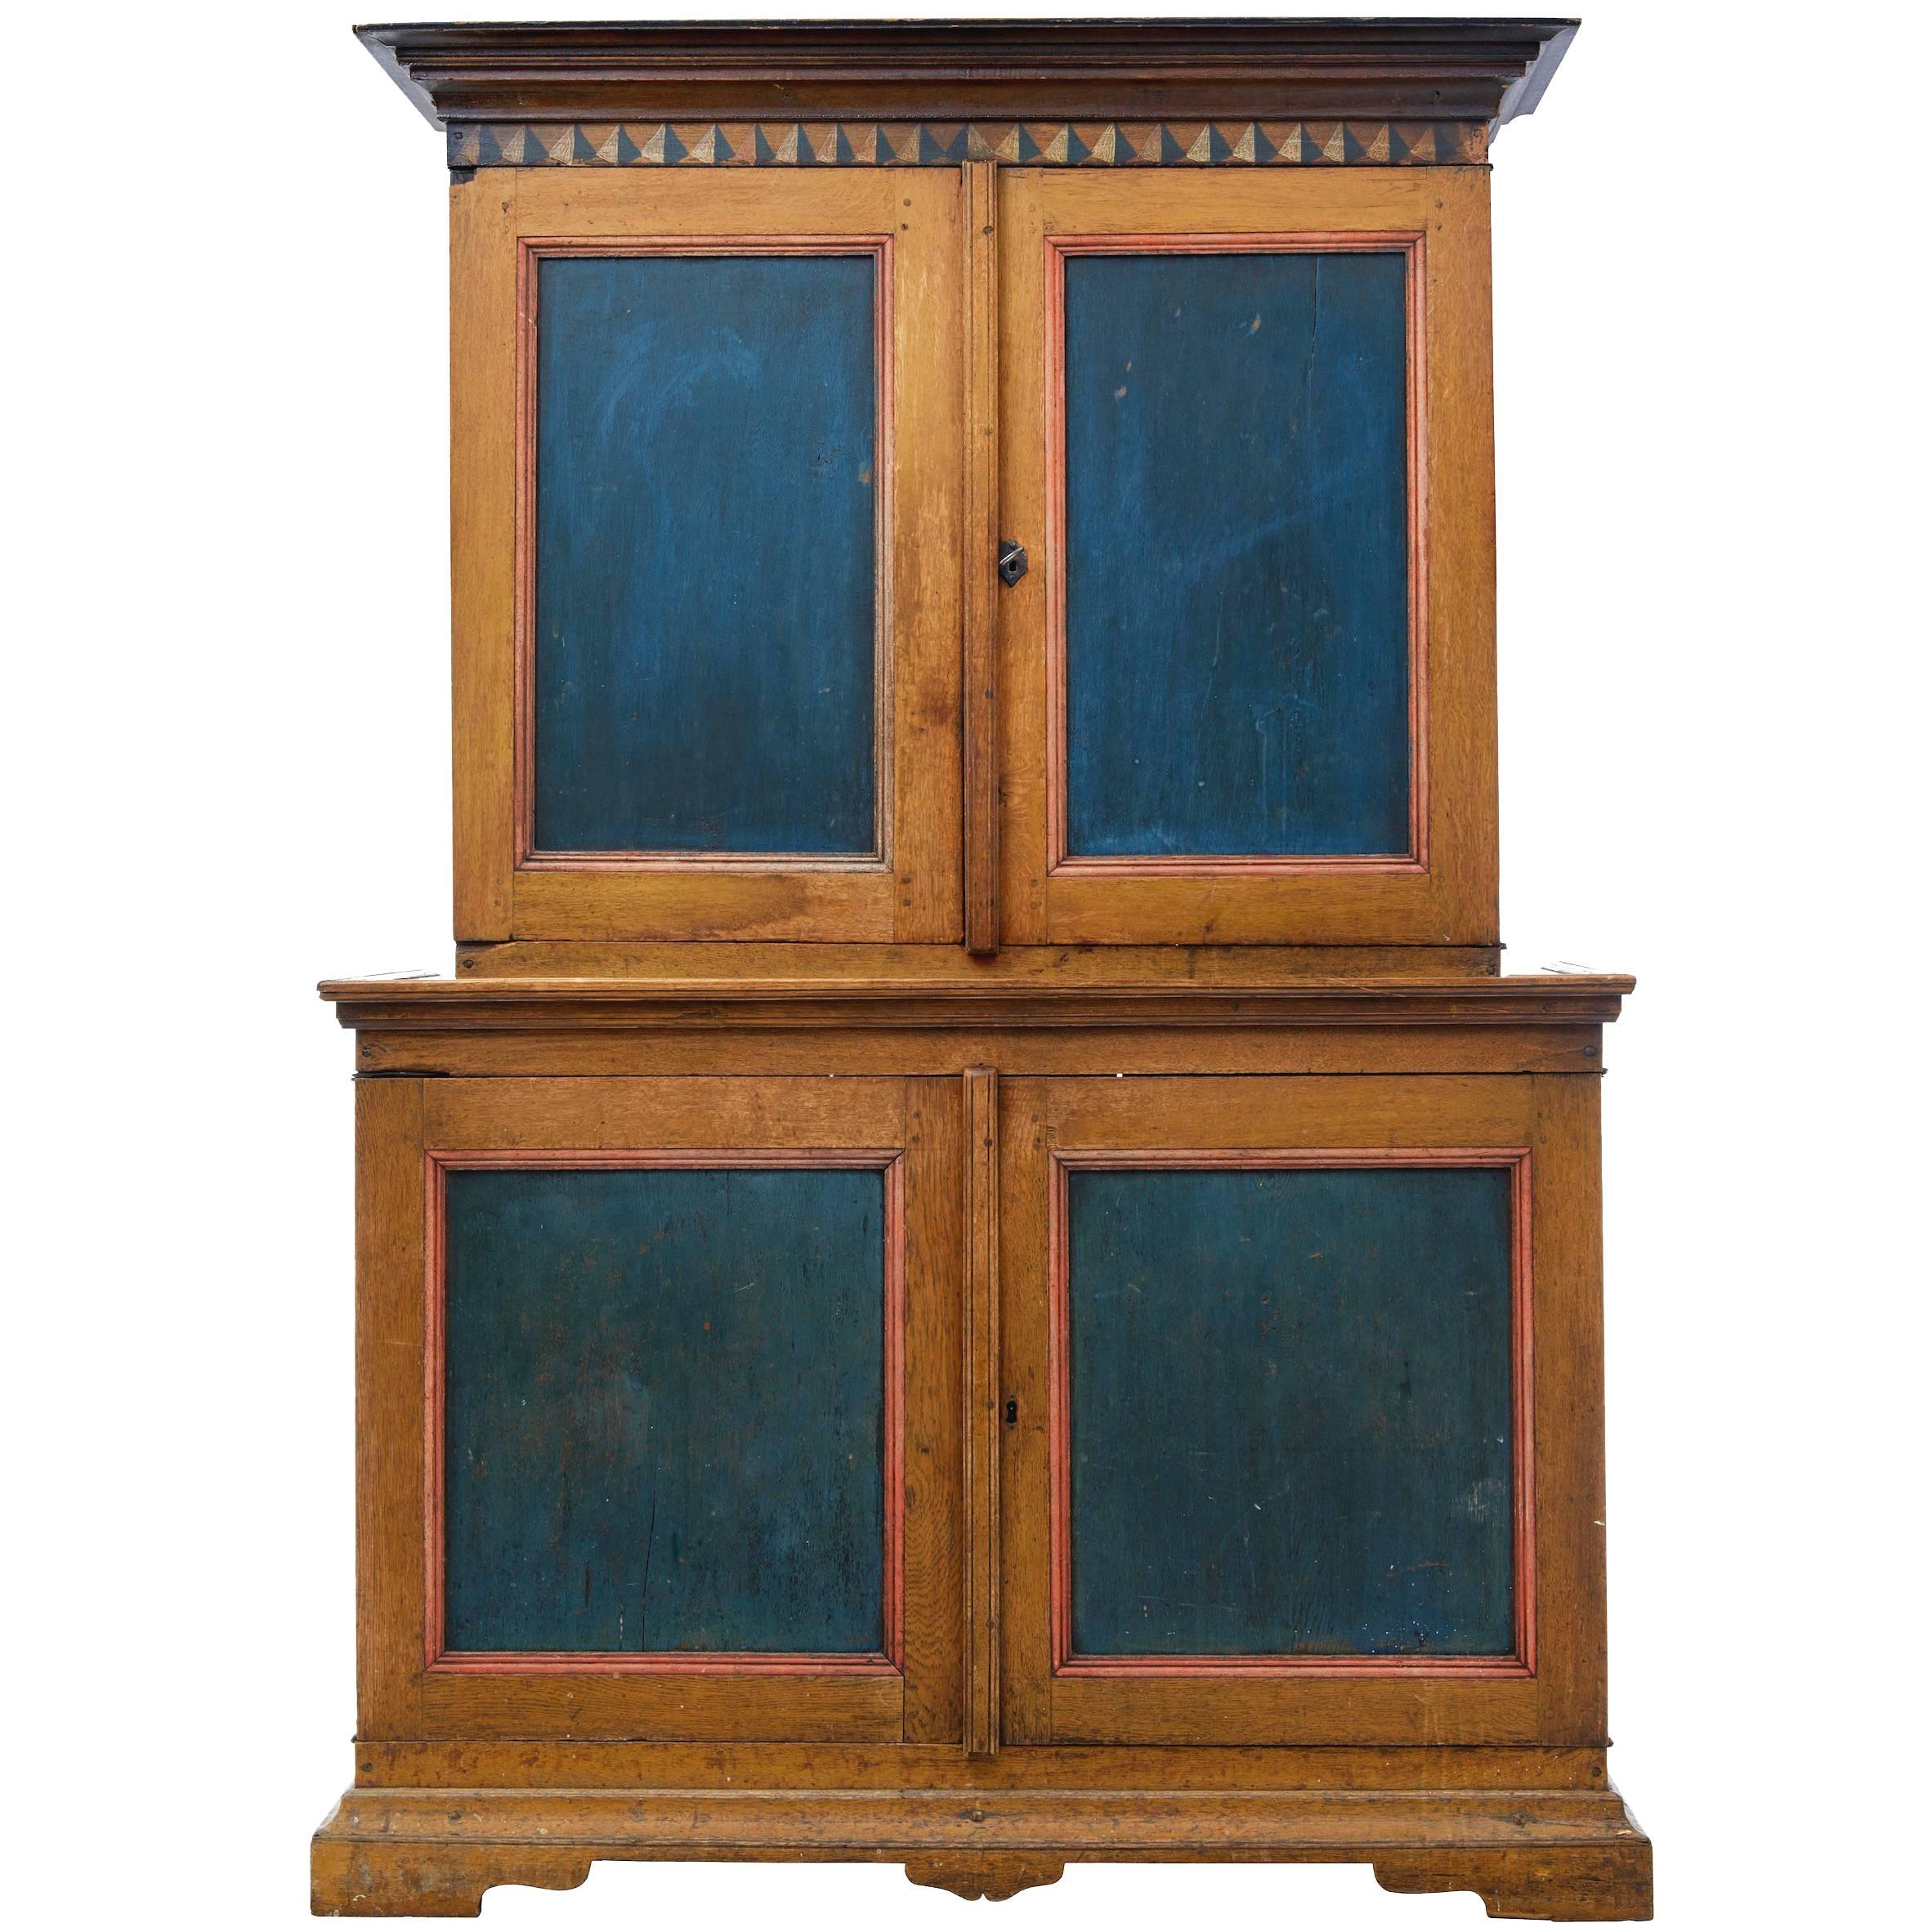 Rare Early 19th Century Oak Dalsland Region Swedish Painted Cabinet